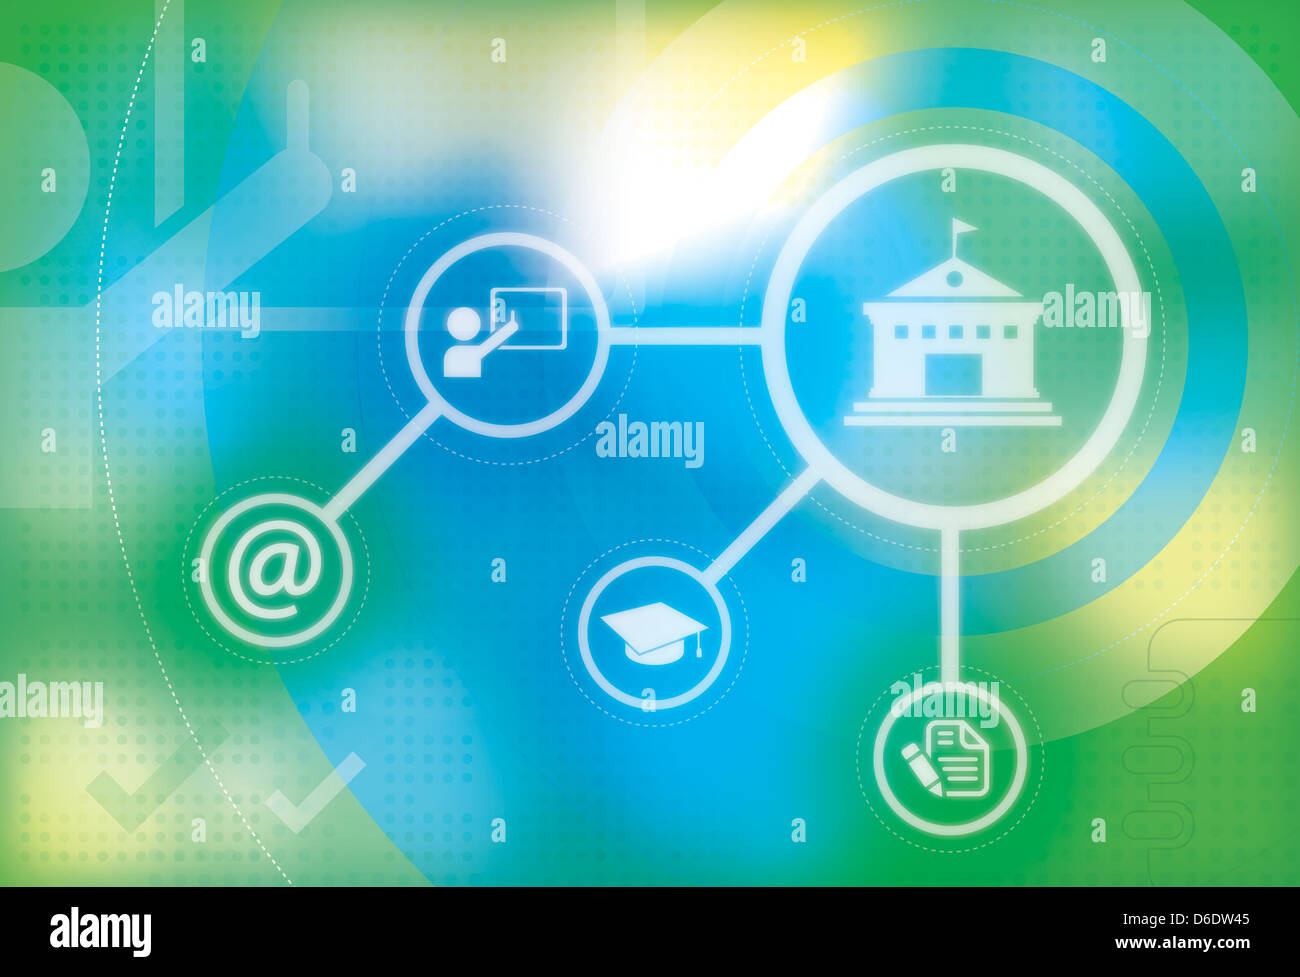 Illustration of online education concept Stock Photo